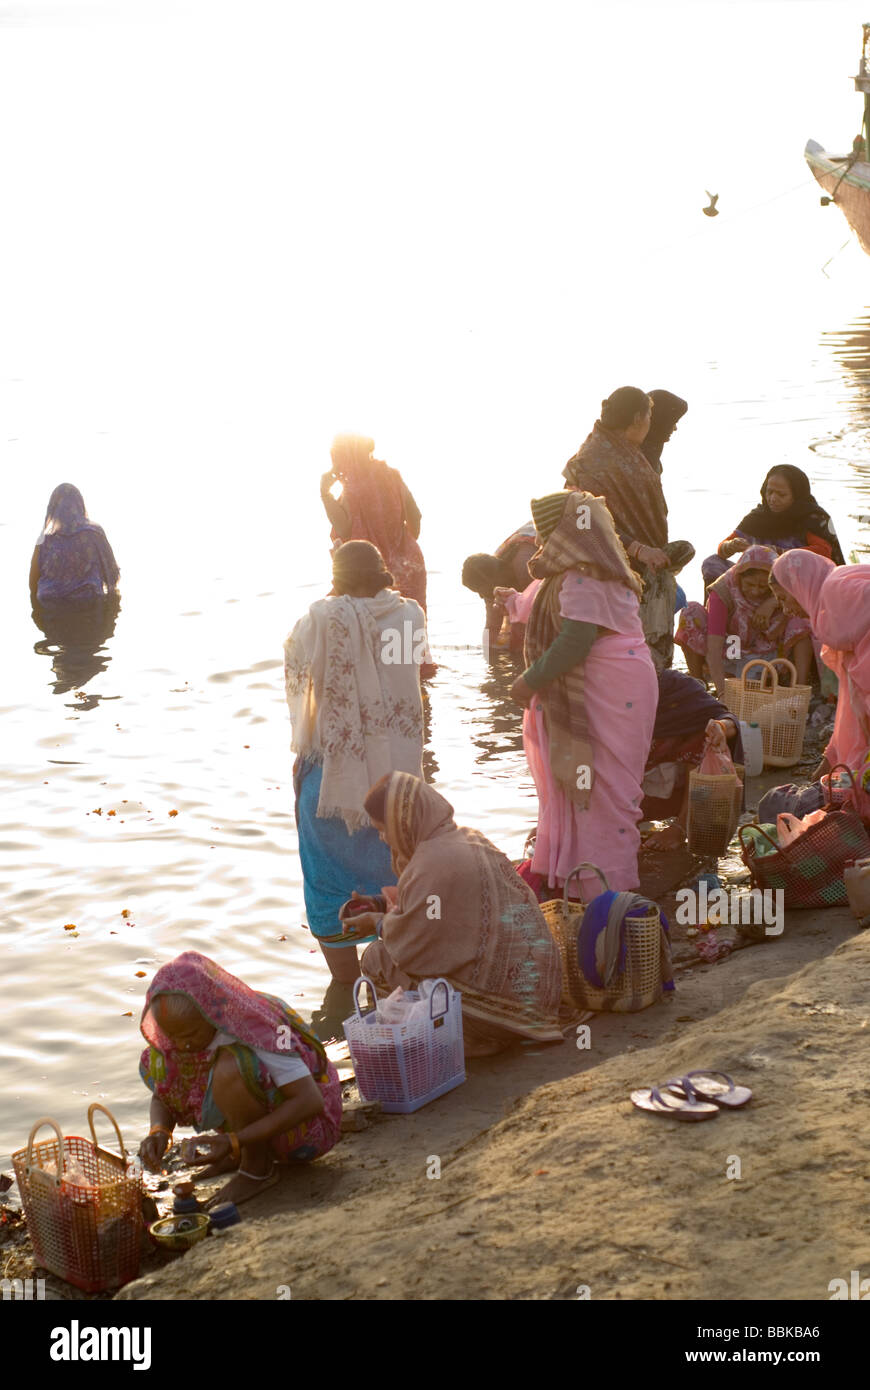 Indian women praying and making offering for river Ganges, holy for the Hindu. Assi bathing ghat, Varanasi, India. Stock Photo